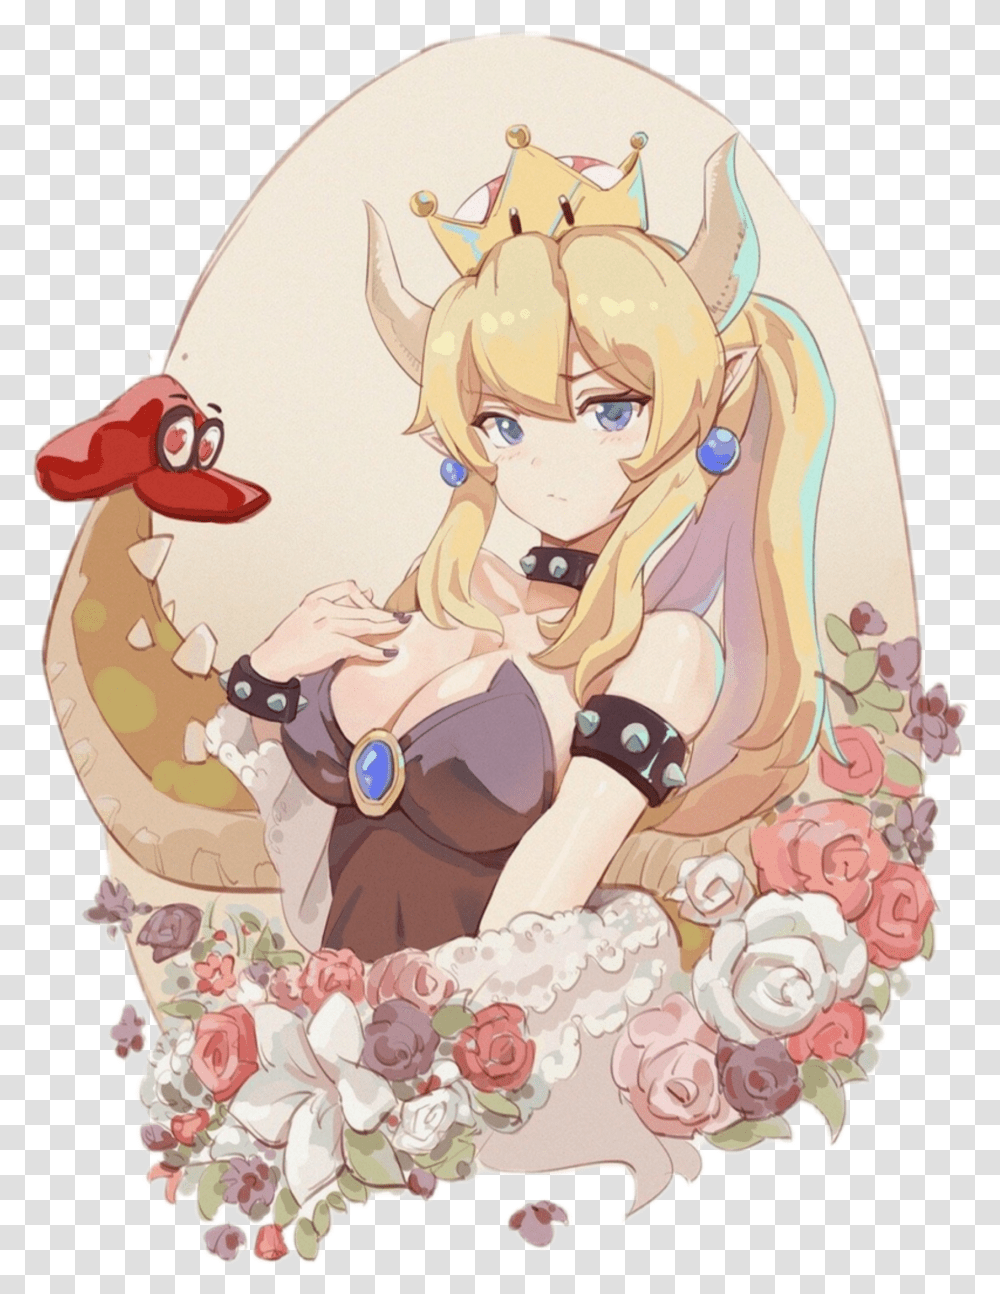 Freetoeditbowsette Bower Waifu Remixit In 2020 Anime Smug Queen Anime Transparent Png